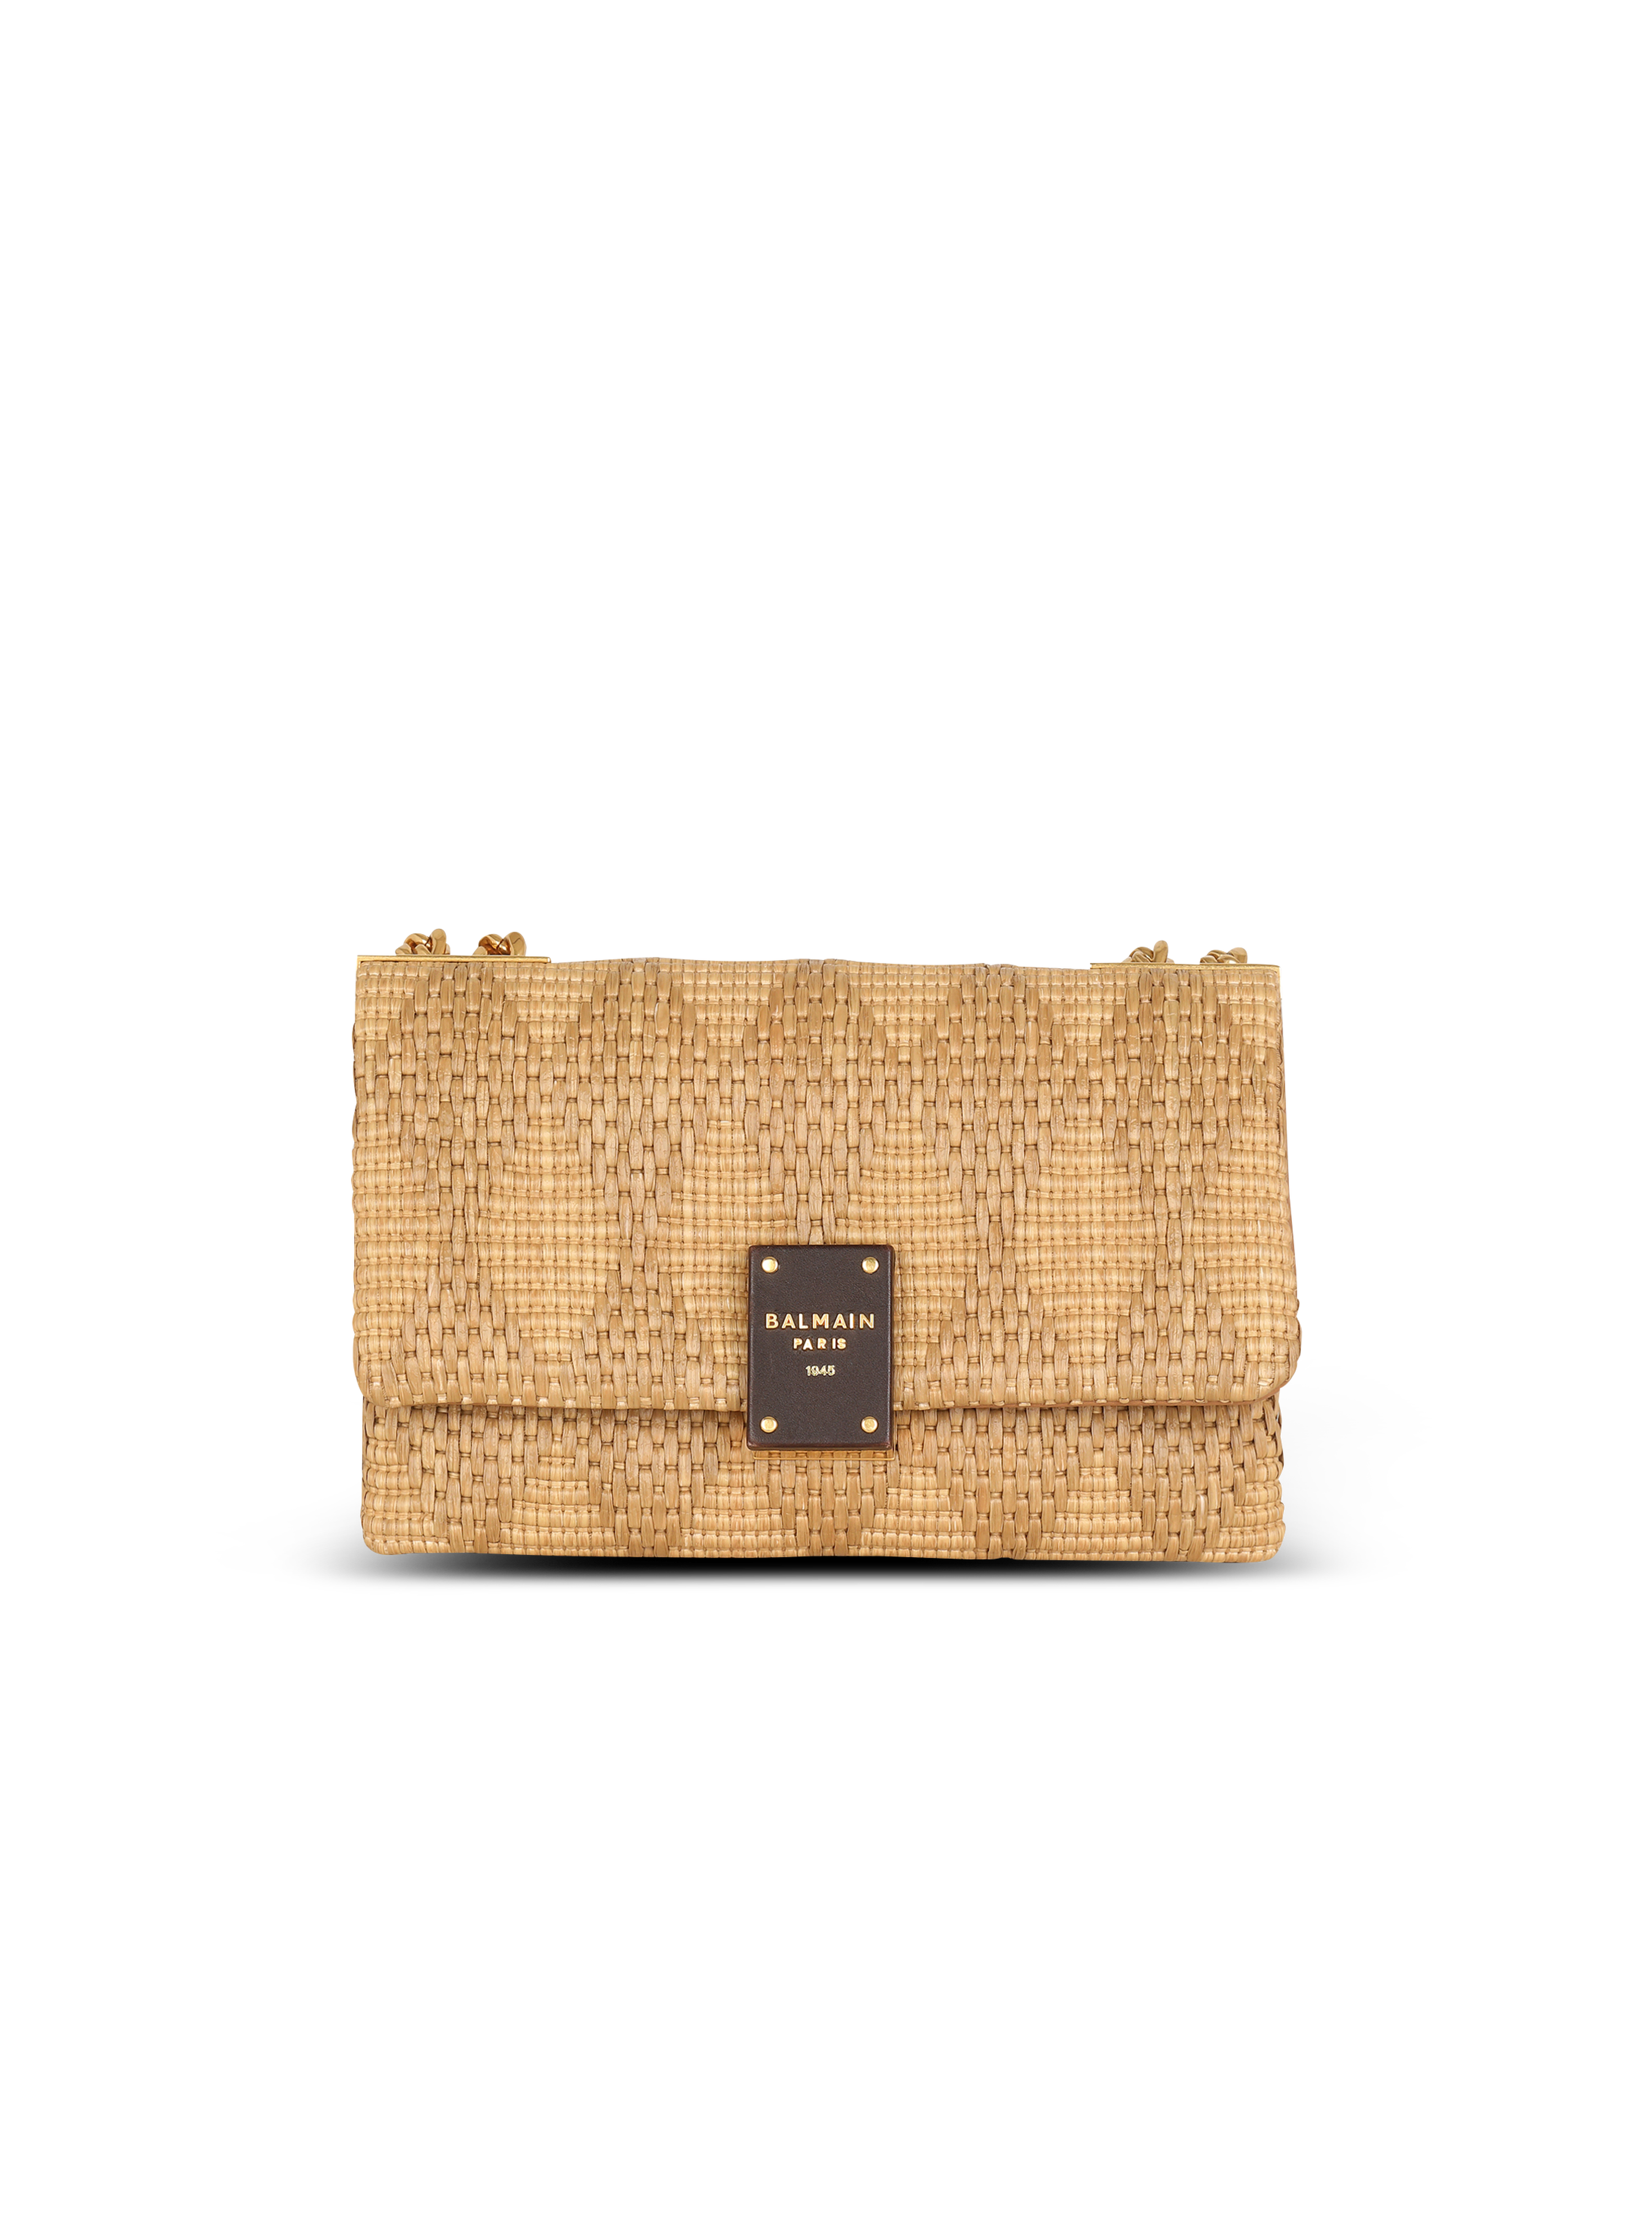 1945 Soft small bag in leather and raffia, brown